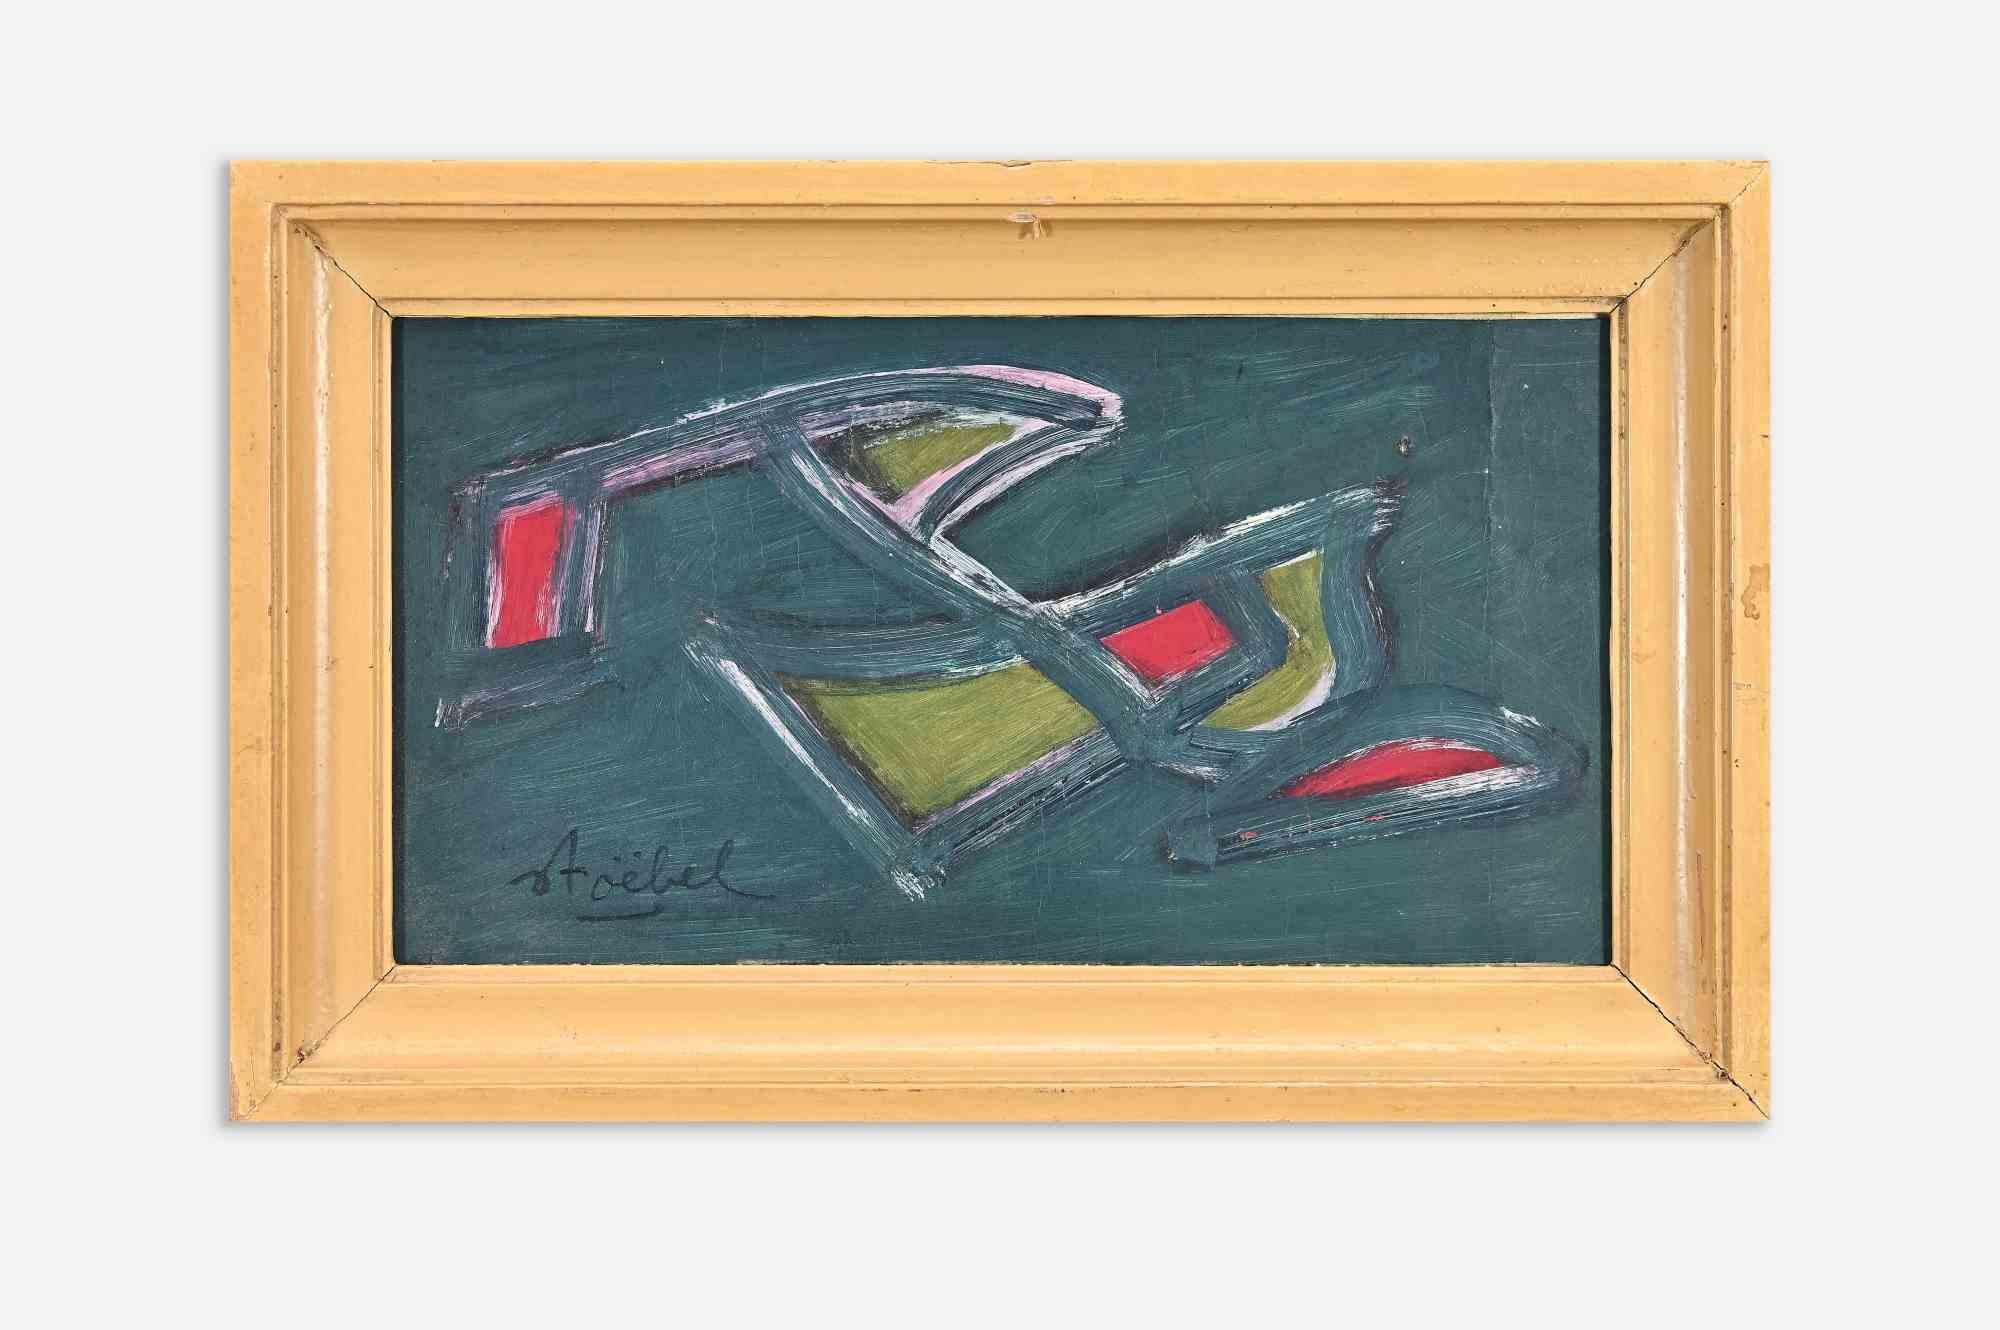 Edgar Stoëbel Abstract Painting - Abstract Composition - Tempera on Board by Edgar Stoebel - Mid-20th Century